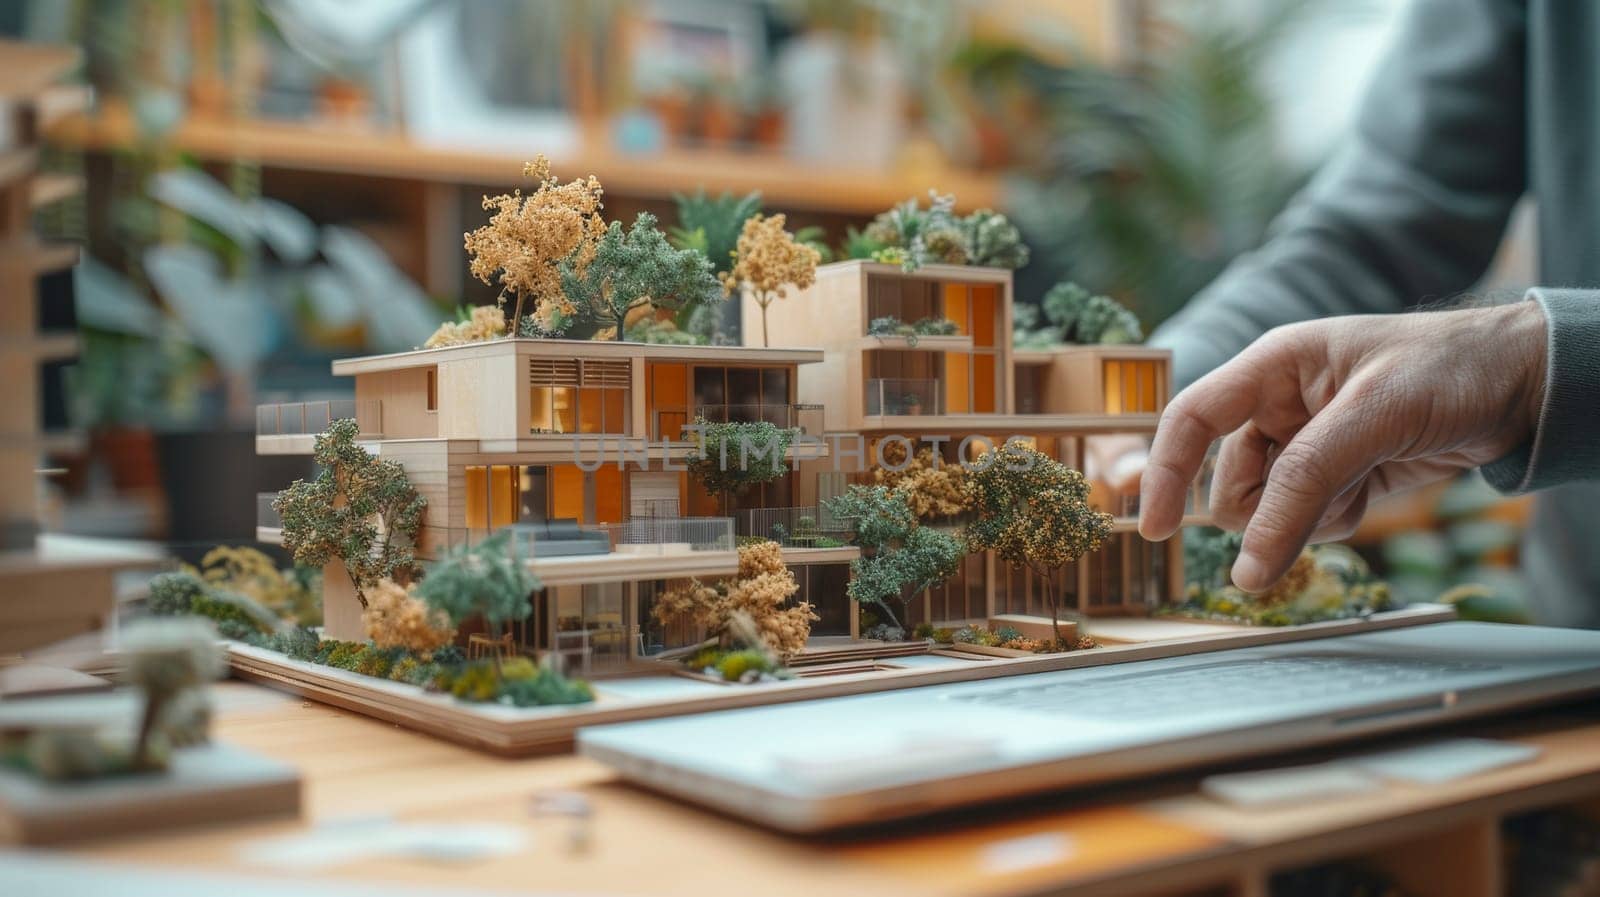 The meeting takes place in a modern multiethnic architectural agency office. Professional architects and designers discuss design sustainable and energy efficient housing projects, using a tablet